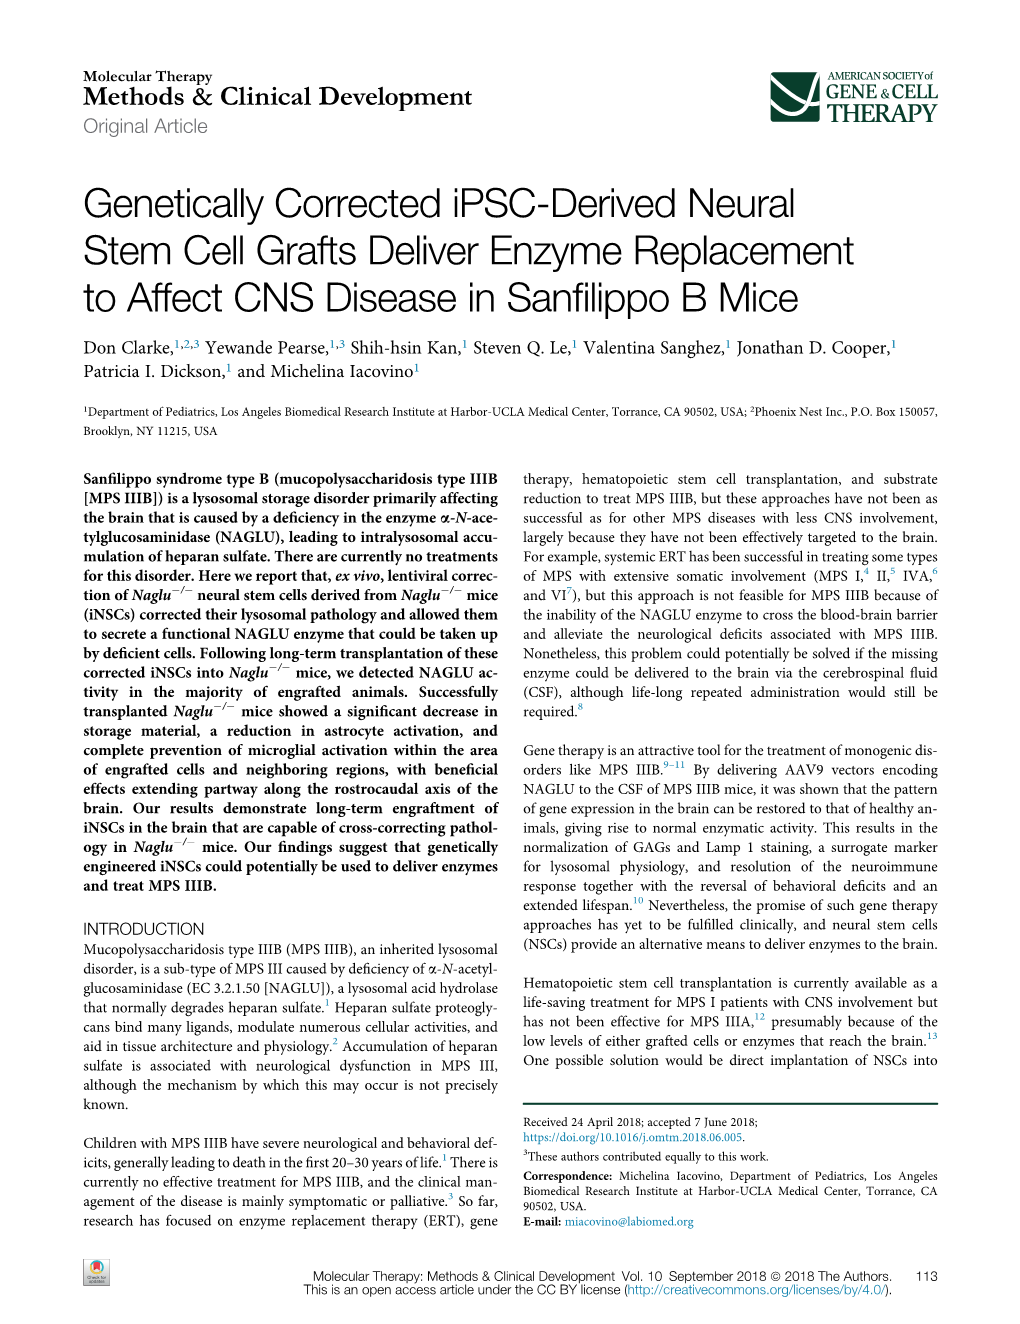 Genetically Corrected Ipsc-Derived Neural Stem Cell Grafts Deliver Enzyme Replacement to Affect CNS Disease in Sanﬁlippo B Mice